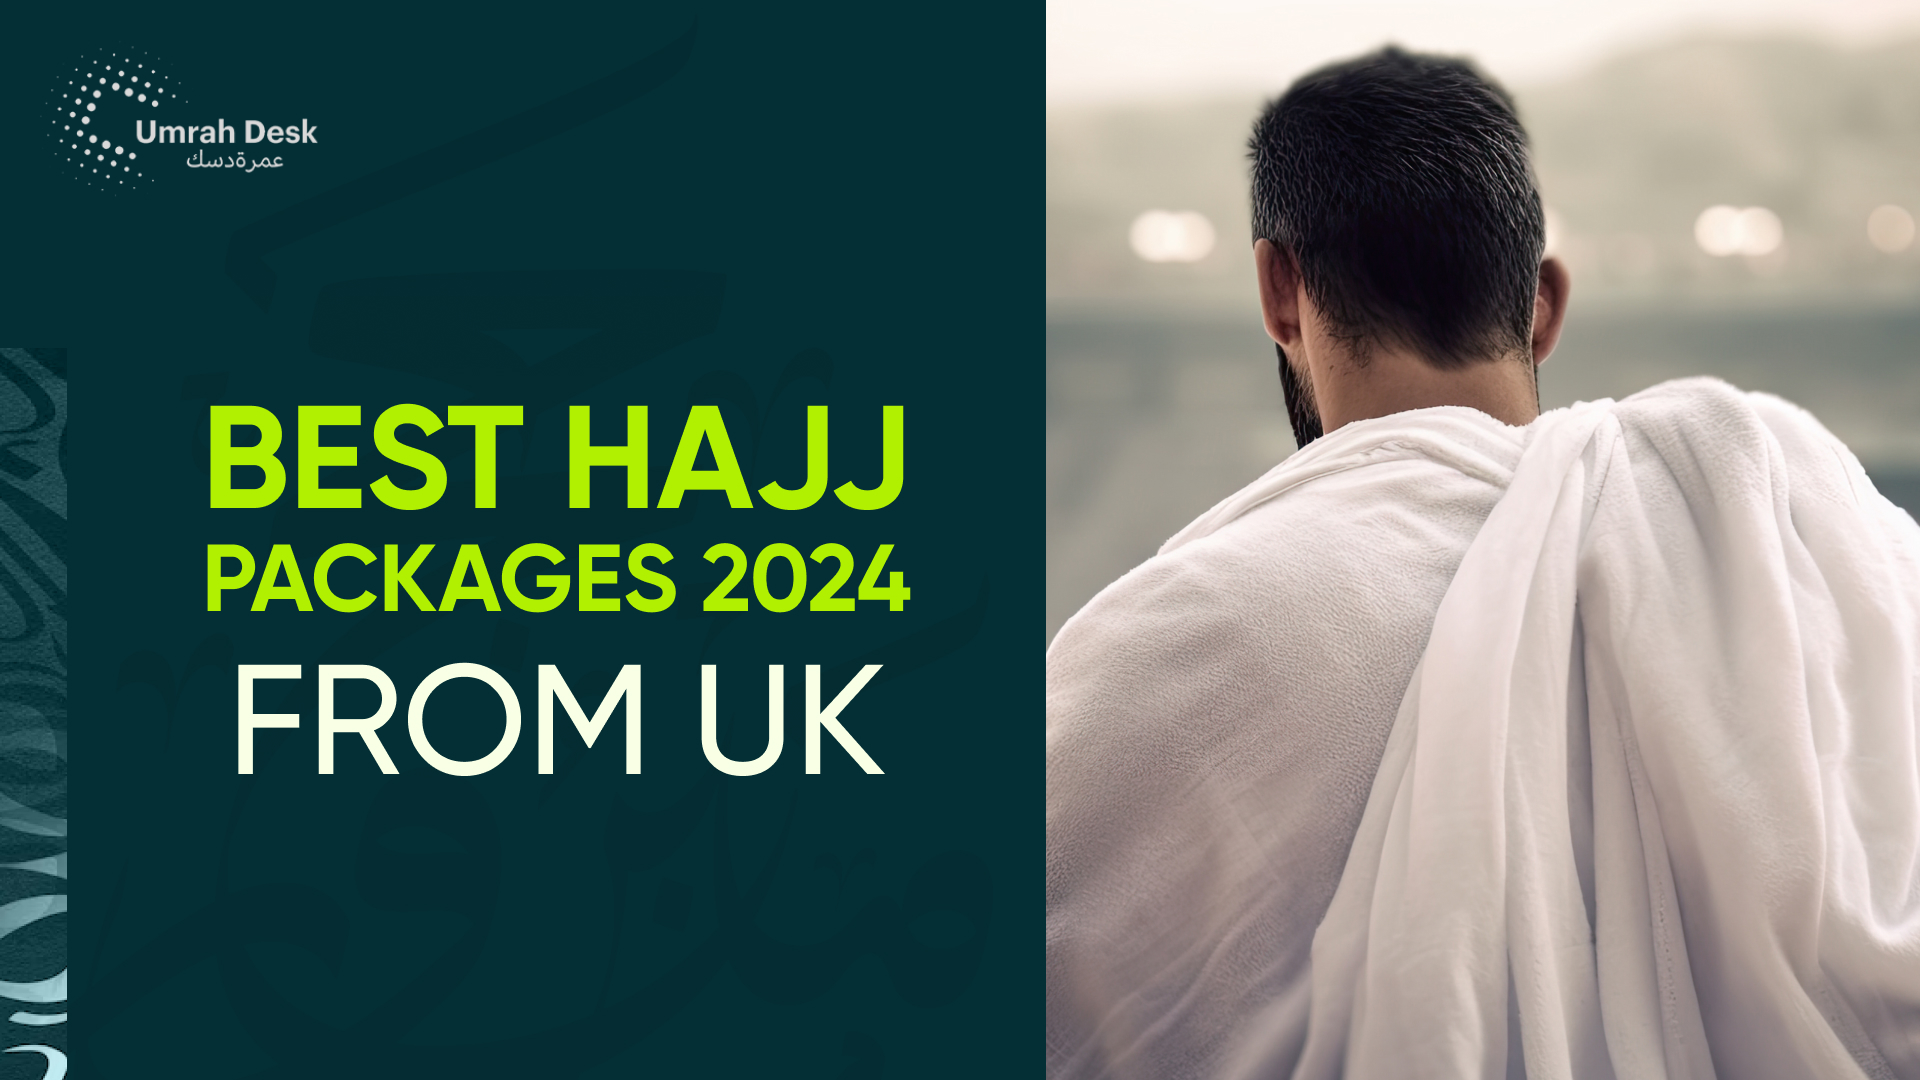 Best Hajj Packages 2024 From UK